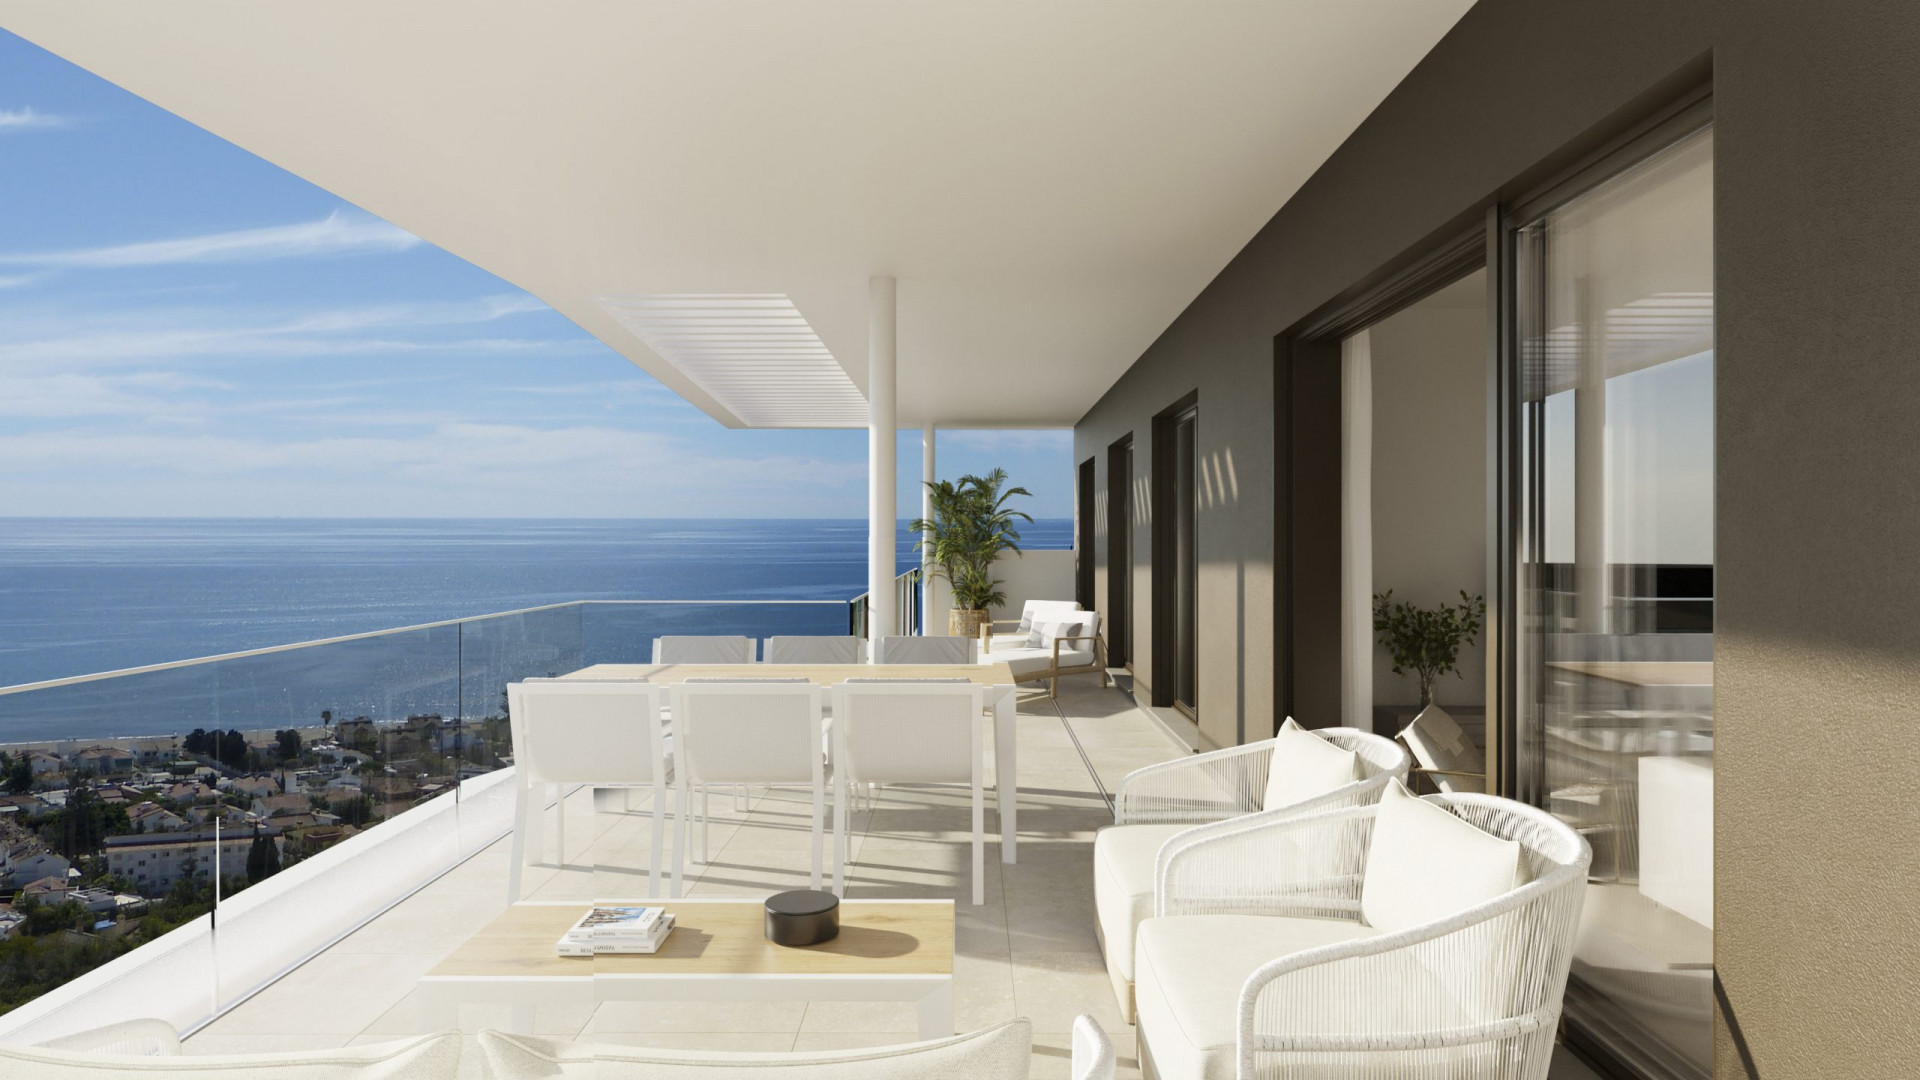 Idilia Mare: Development of 34 modern flats and penthouses with sea views in Rincón de la Victoria. | Image 9